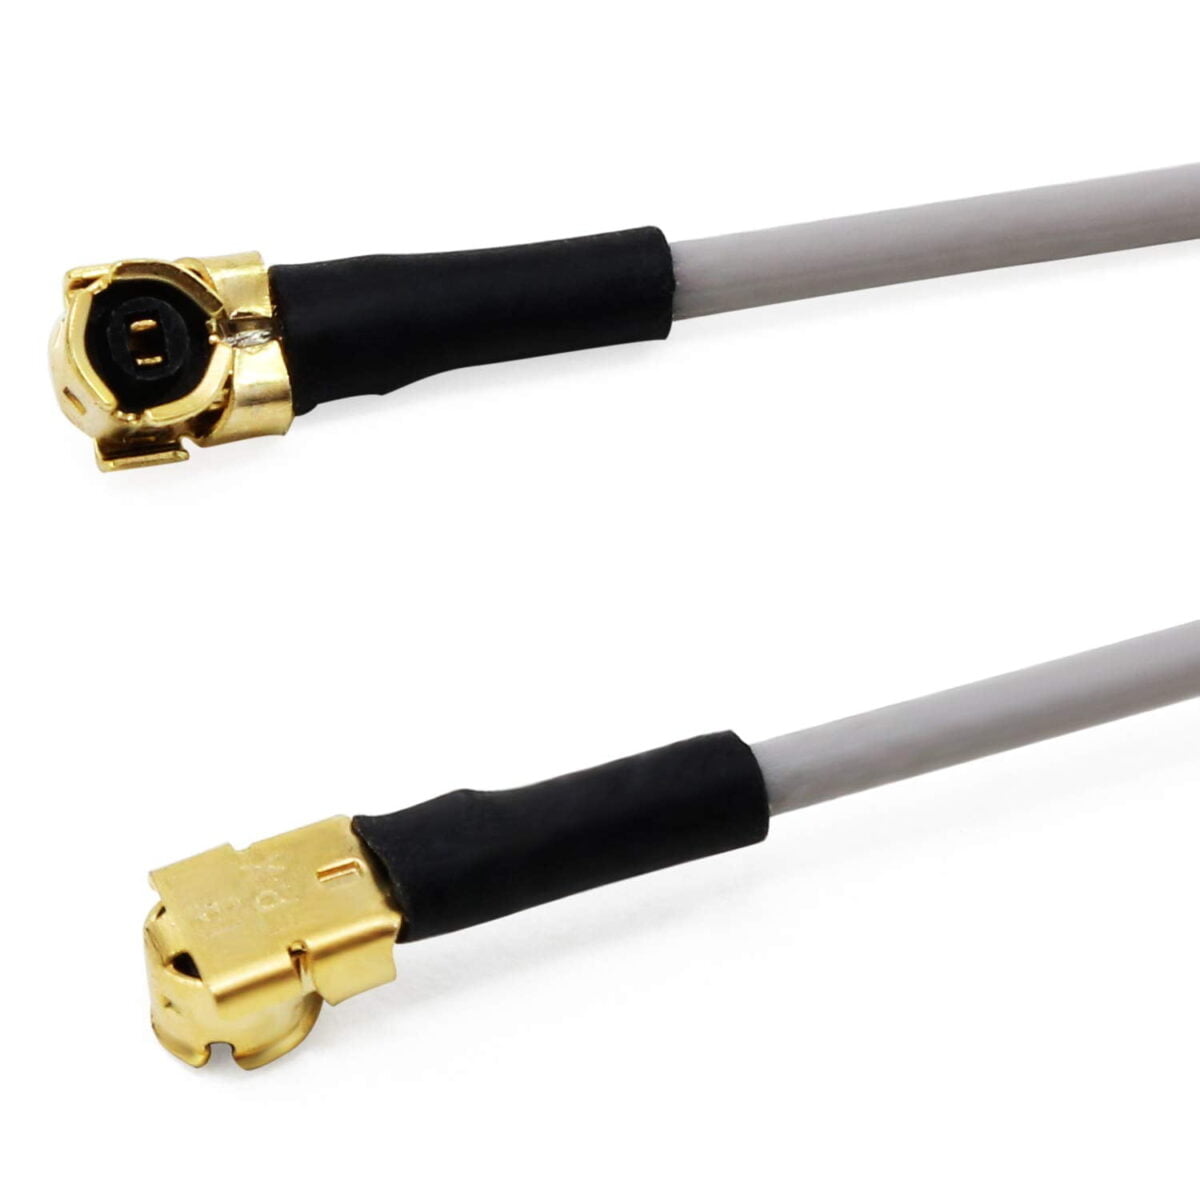 2.4G Receiver Antenna with IPEX Interface Aircraft Receiver Antenna Compatible with Futaba FrSky 150mm